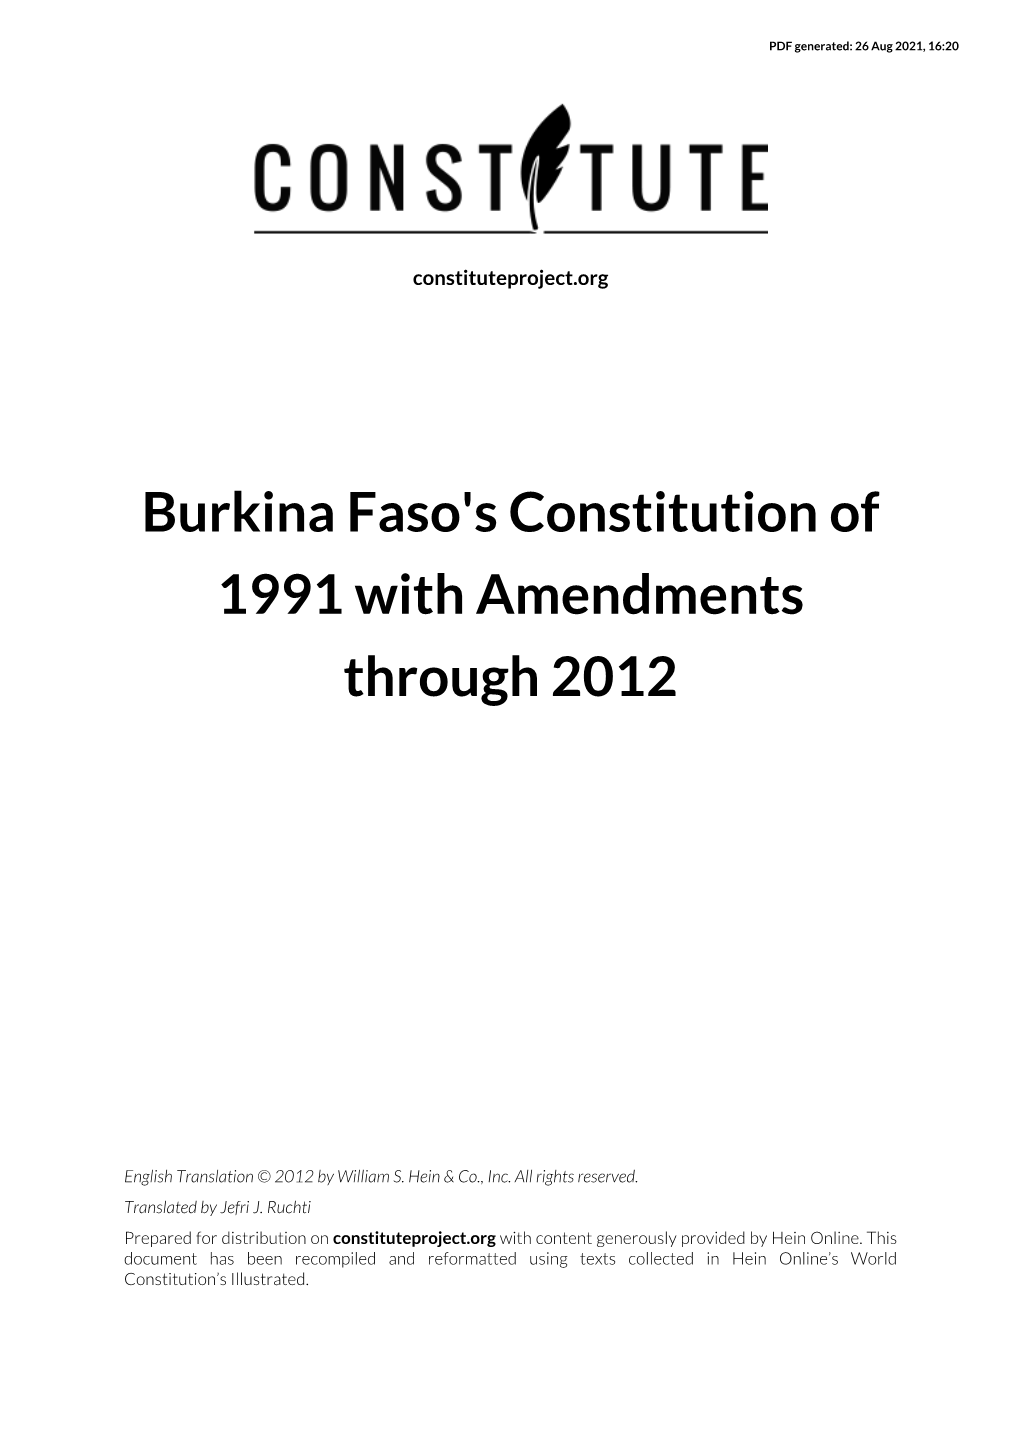 Burkina Faso's Constitution of 1991 with Amendments Through 2012